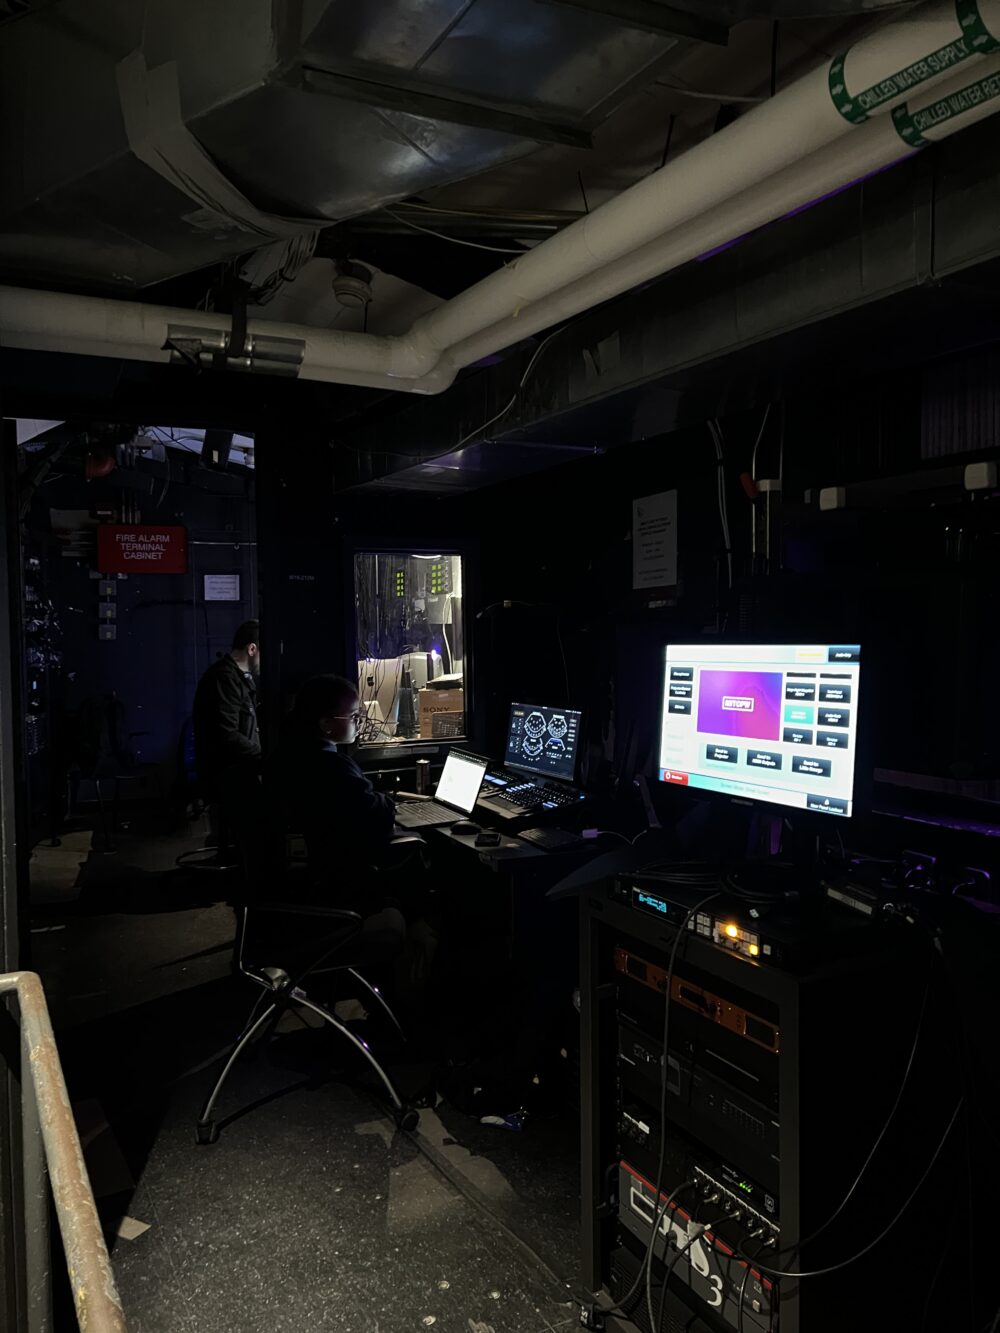 Kresge Auditorium's tech booth, featuring the lighting and sound controls.